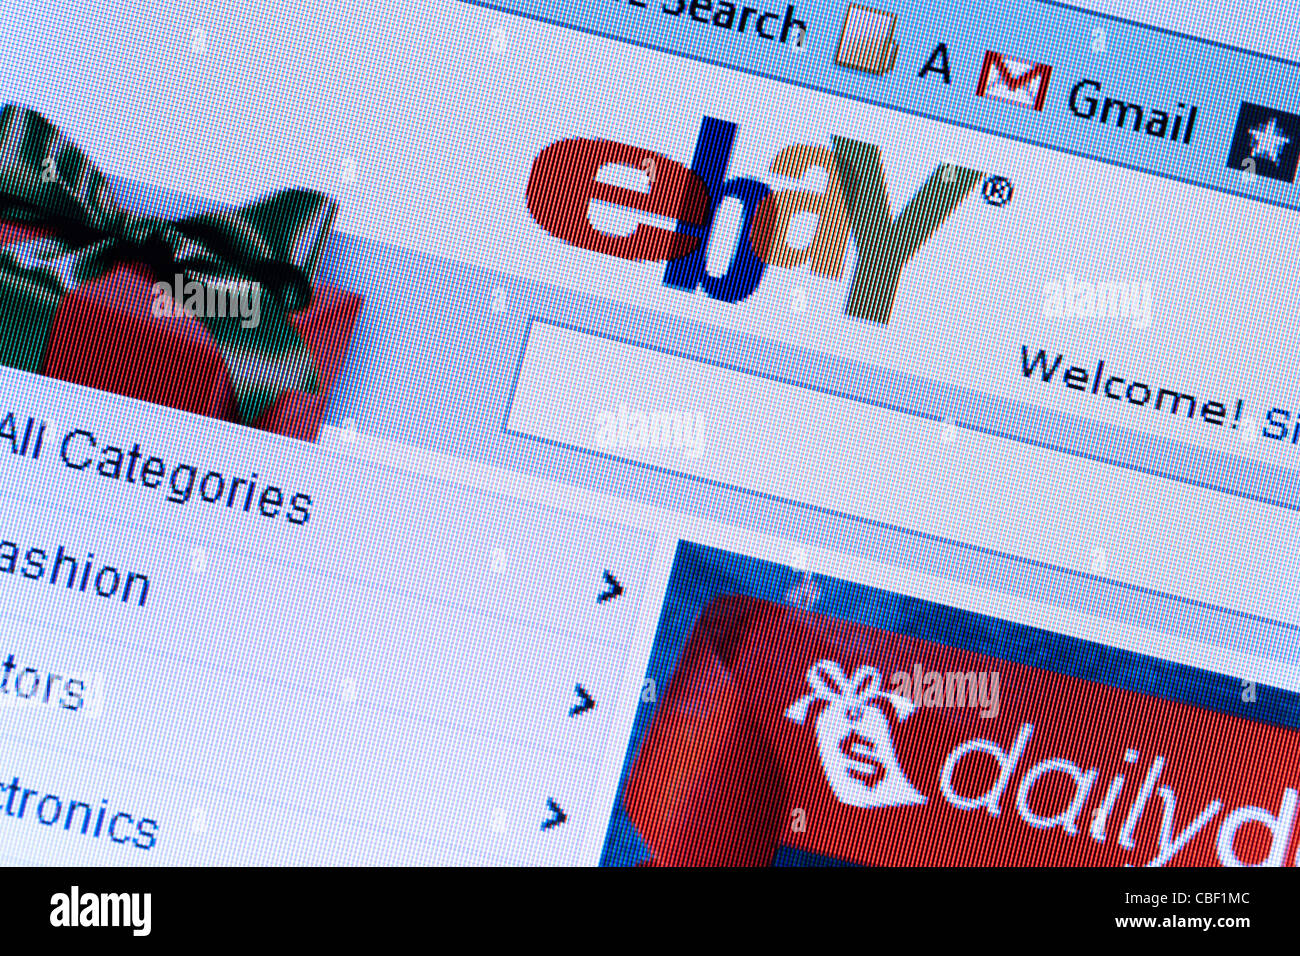 The website of ebay is displayed on a computer monitor Stock Photo